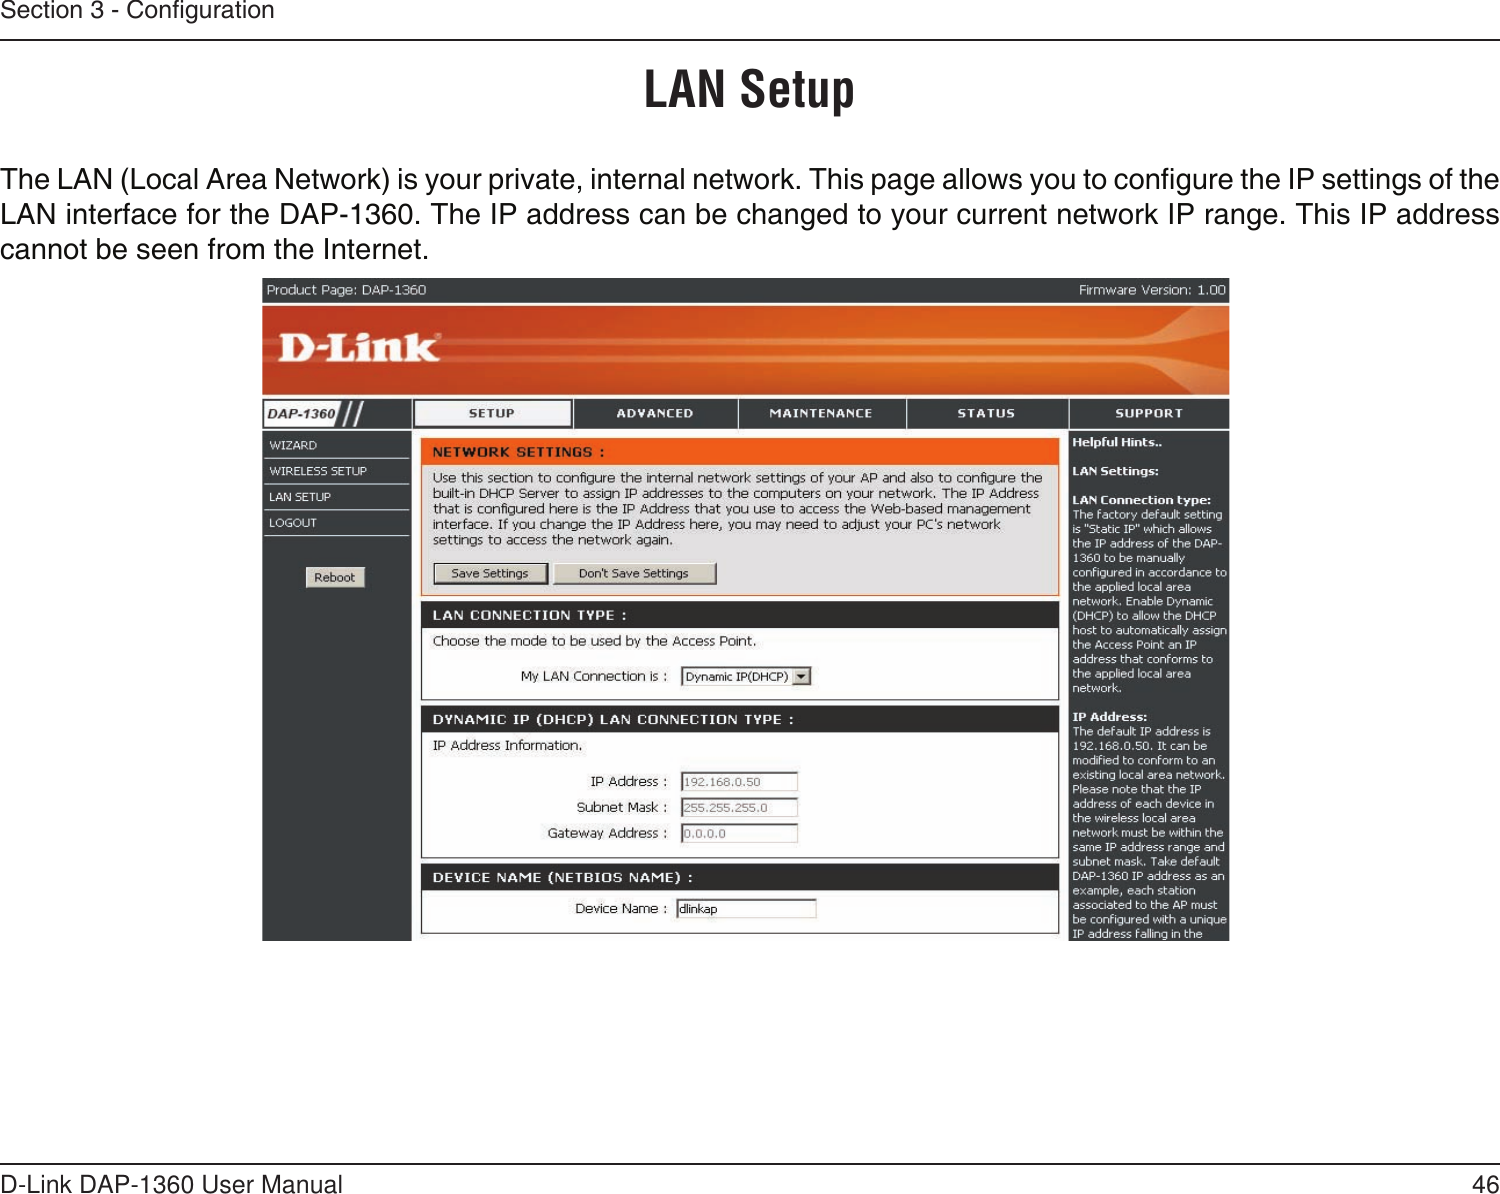 46D-Link DAP-1360 User ManualSection 3 - CongurationLAN SetupThe LAN (Local Area Network) is your private, internal network. This page allows you to congure the IP settings of the LAN interface for the DAP-1360. The IP address can be changed to your current network IP range. This IP address cannot be seen from the Internet.